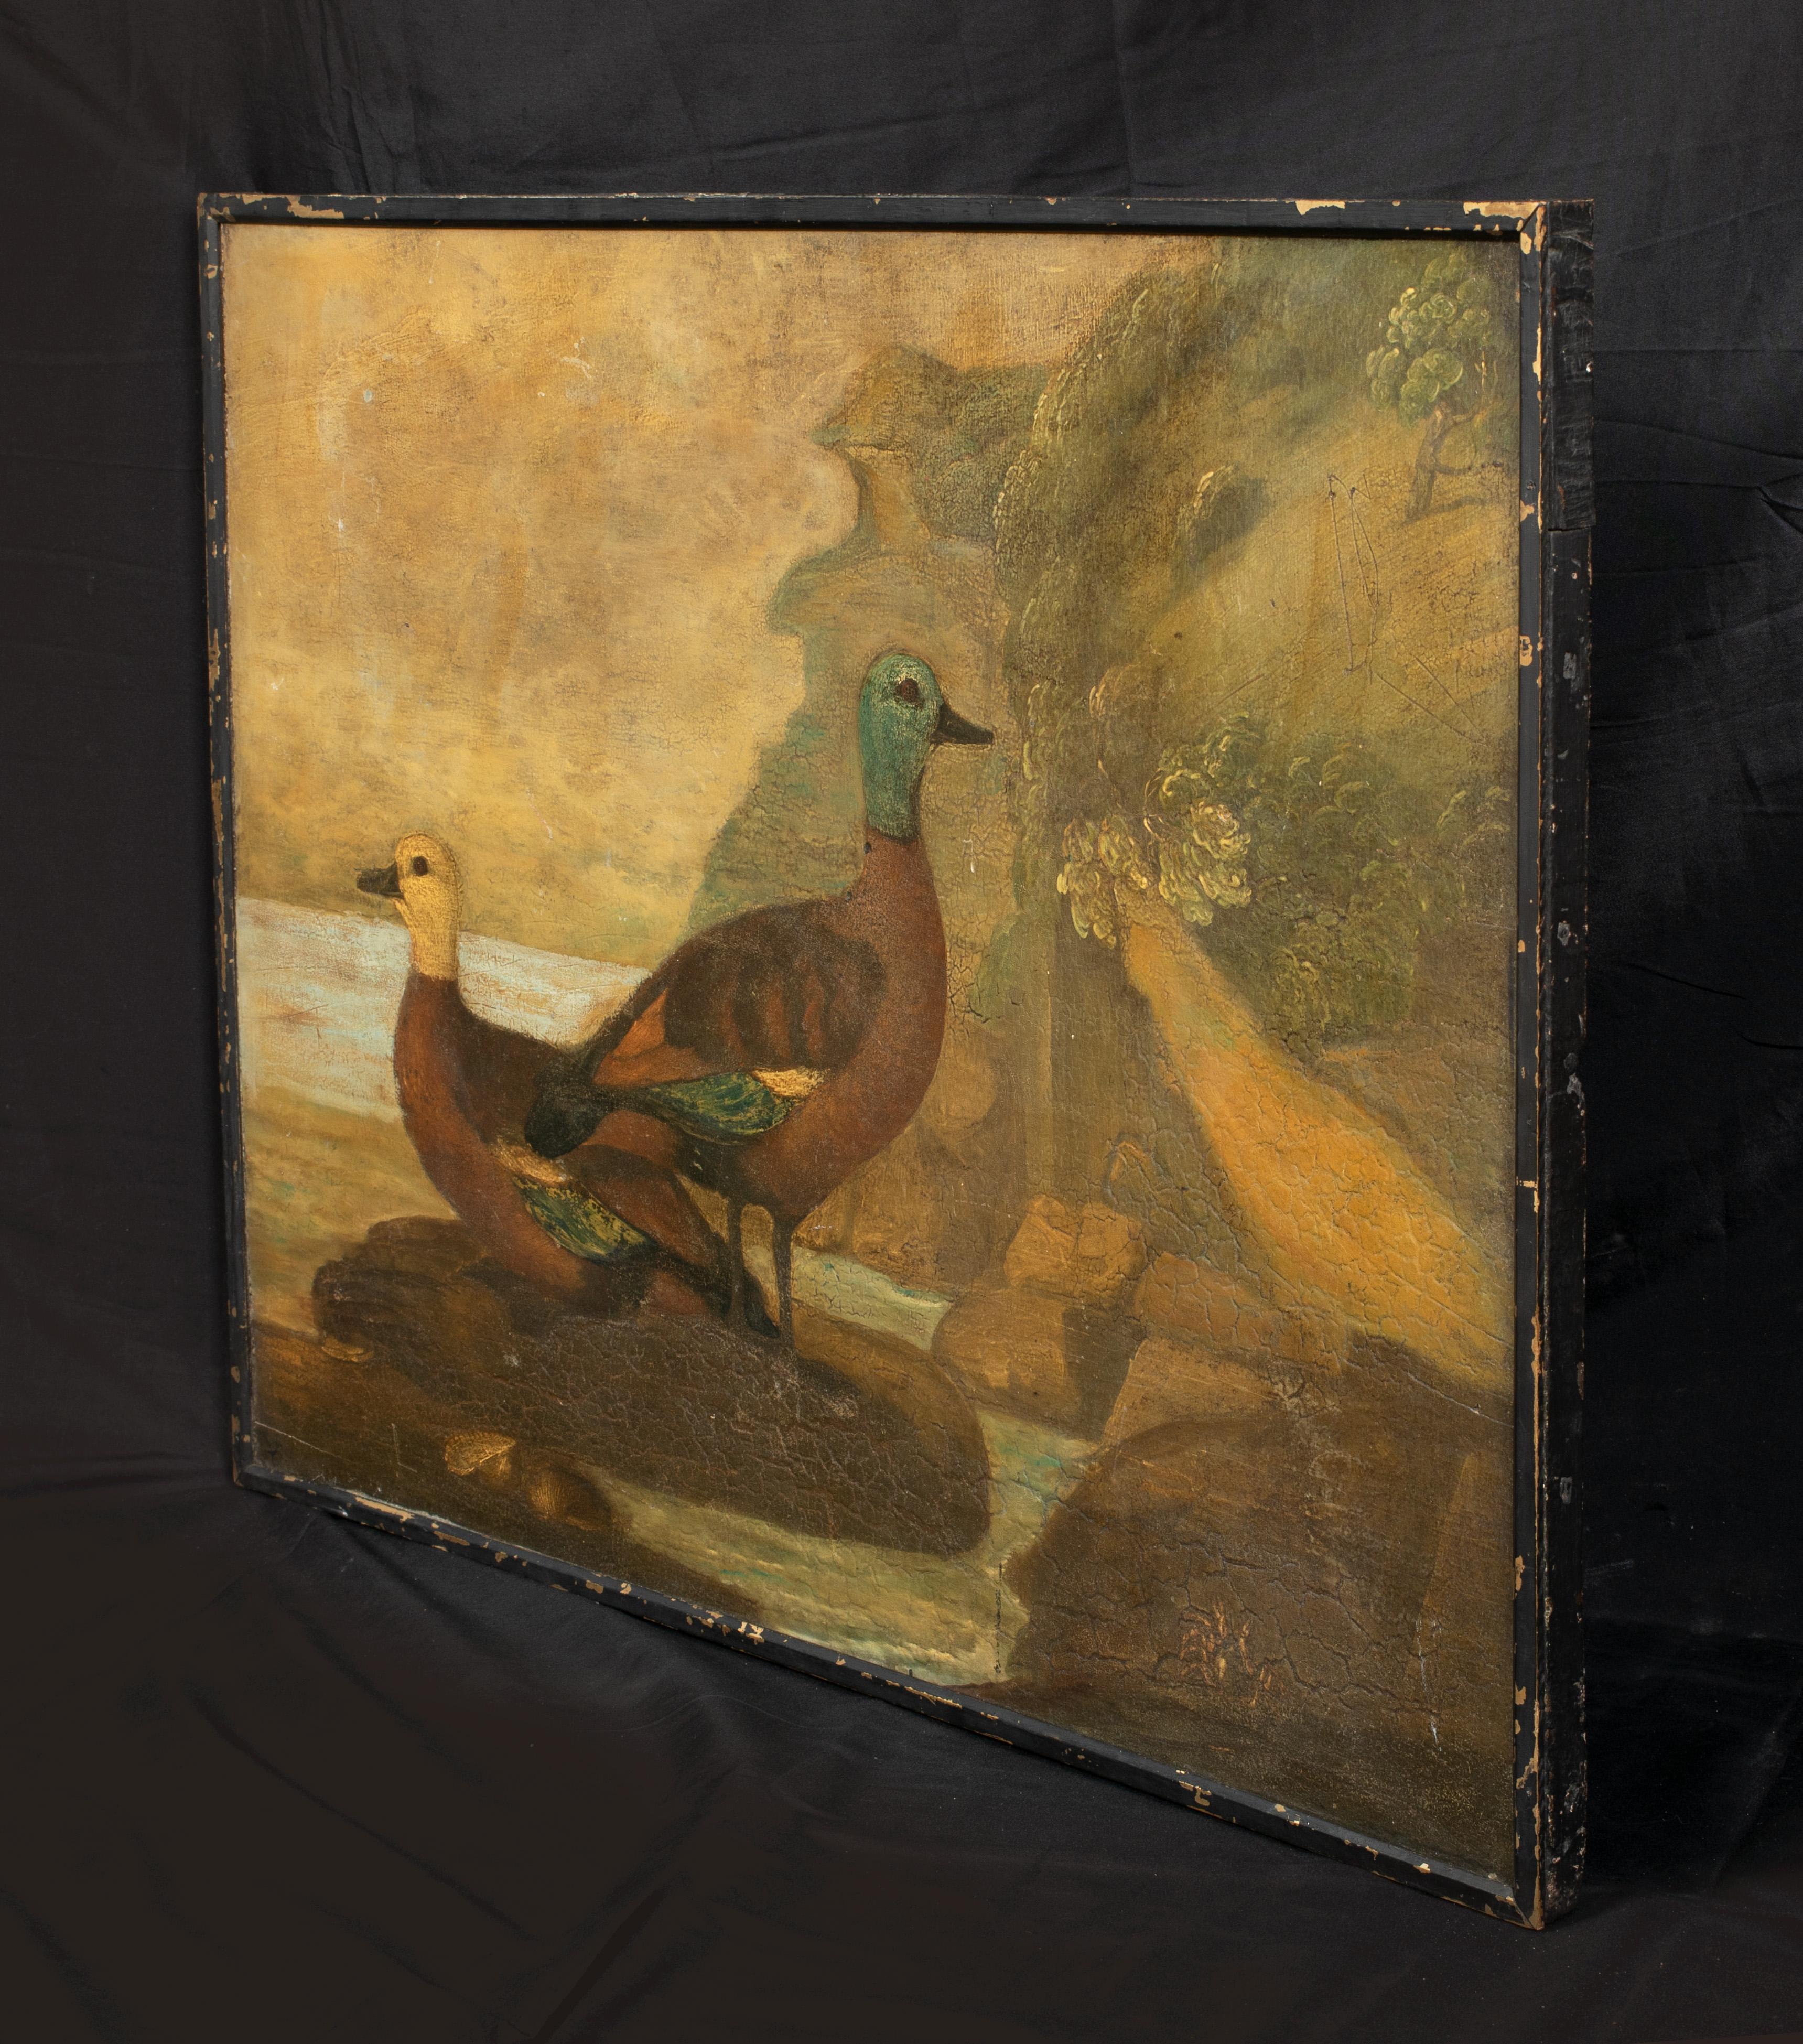 Portrait Of A A Pair Of Ducks, circa 1800

Rare Early English Naive School Study

Large 18th Century  English Naive School study of a pair of ducks by the waters edge, oil on panel. Good quality and condition for its age (needs a light clean that